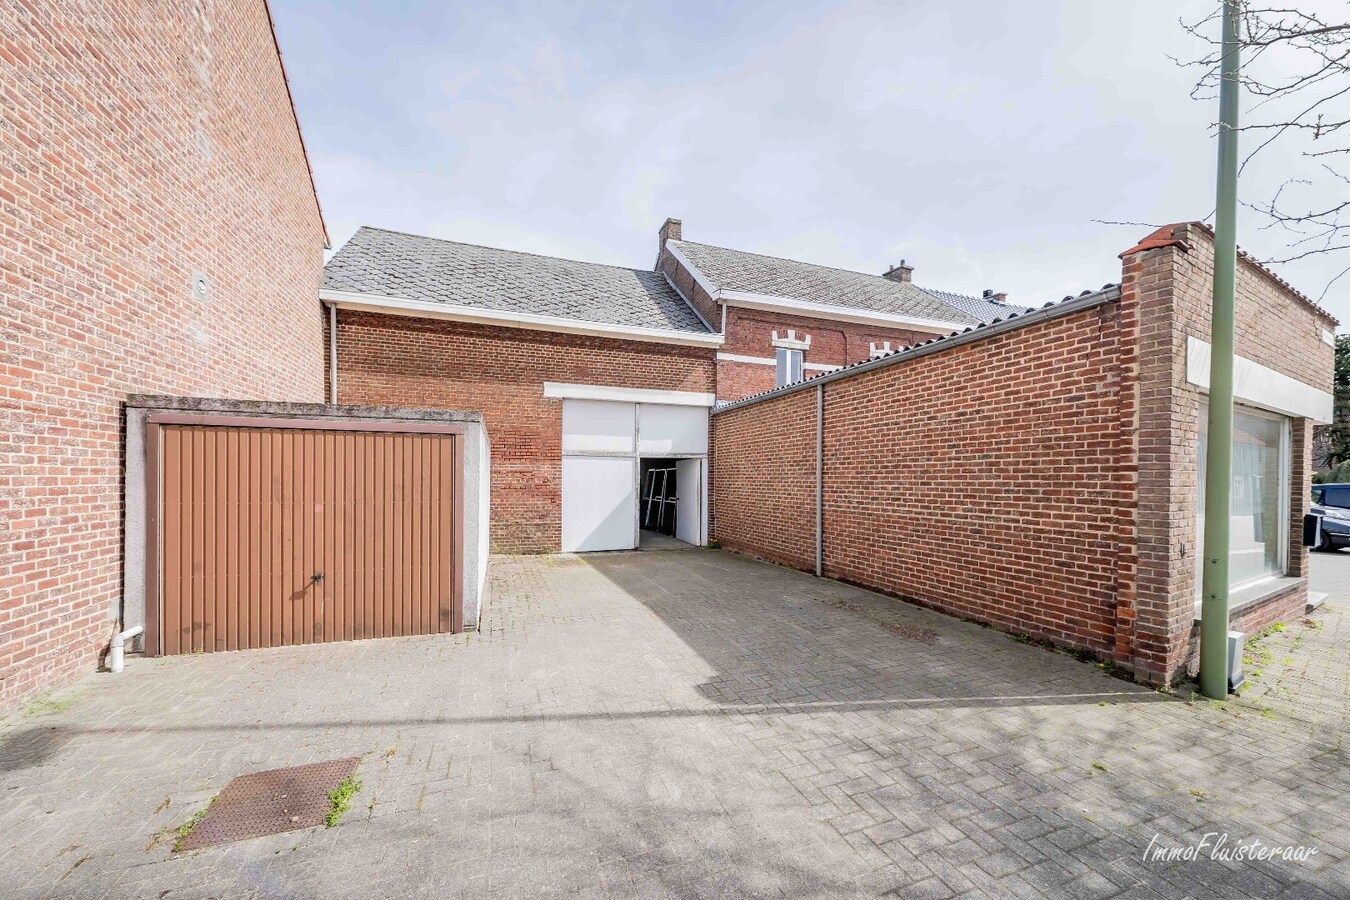 Property for sale in Zoutleeuw